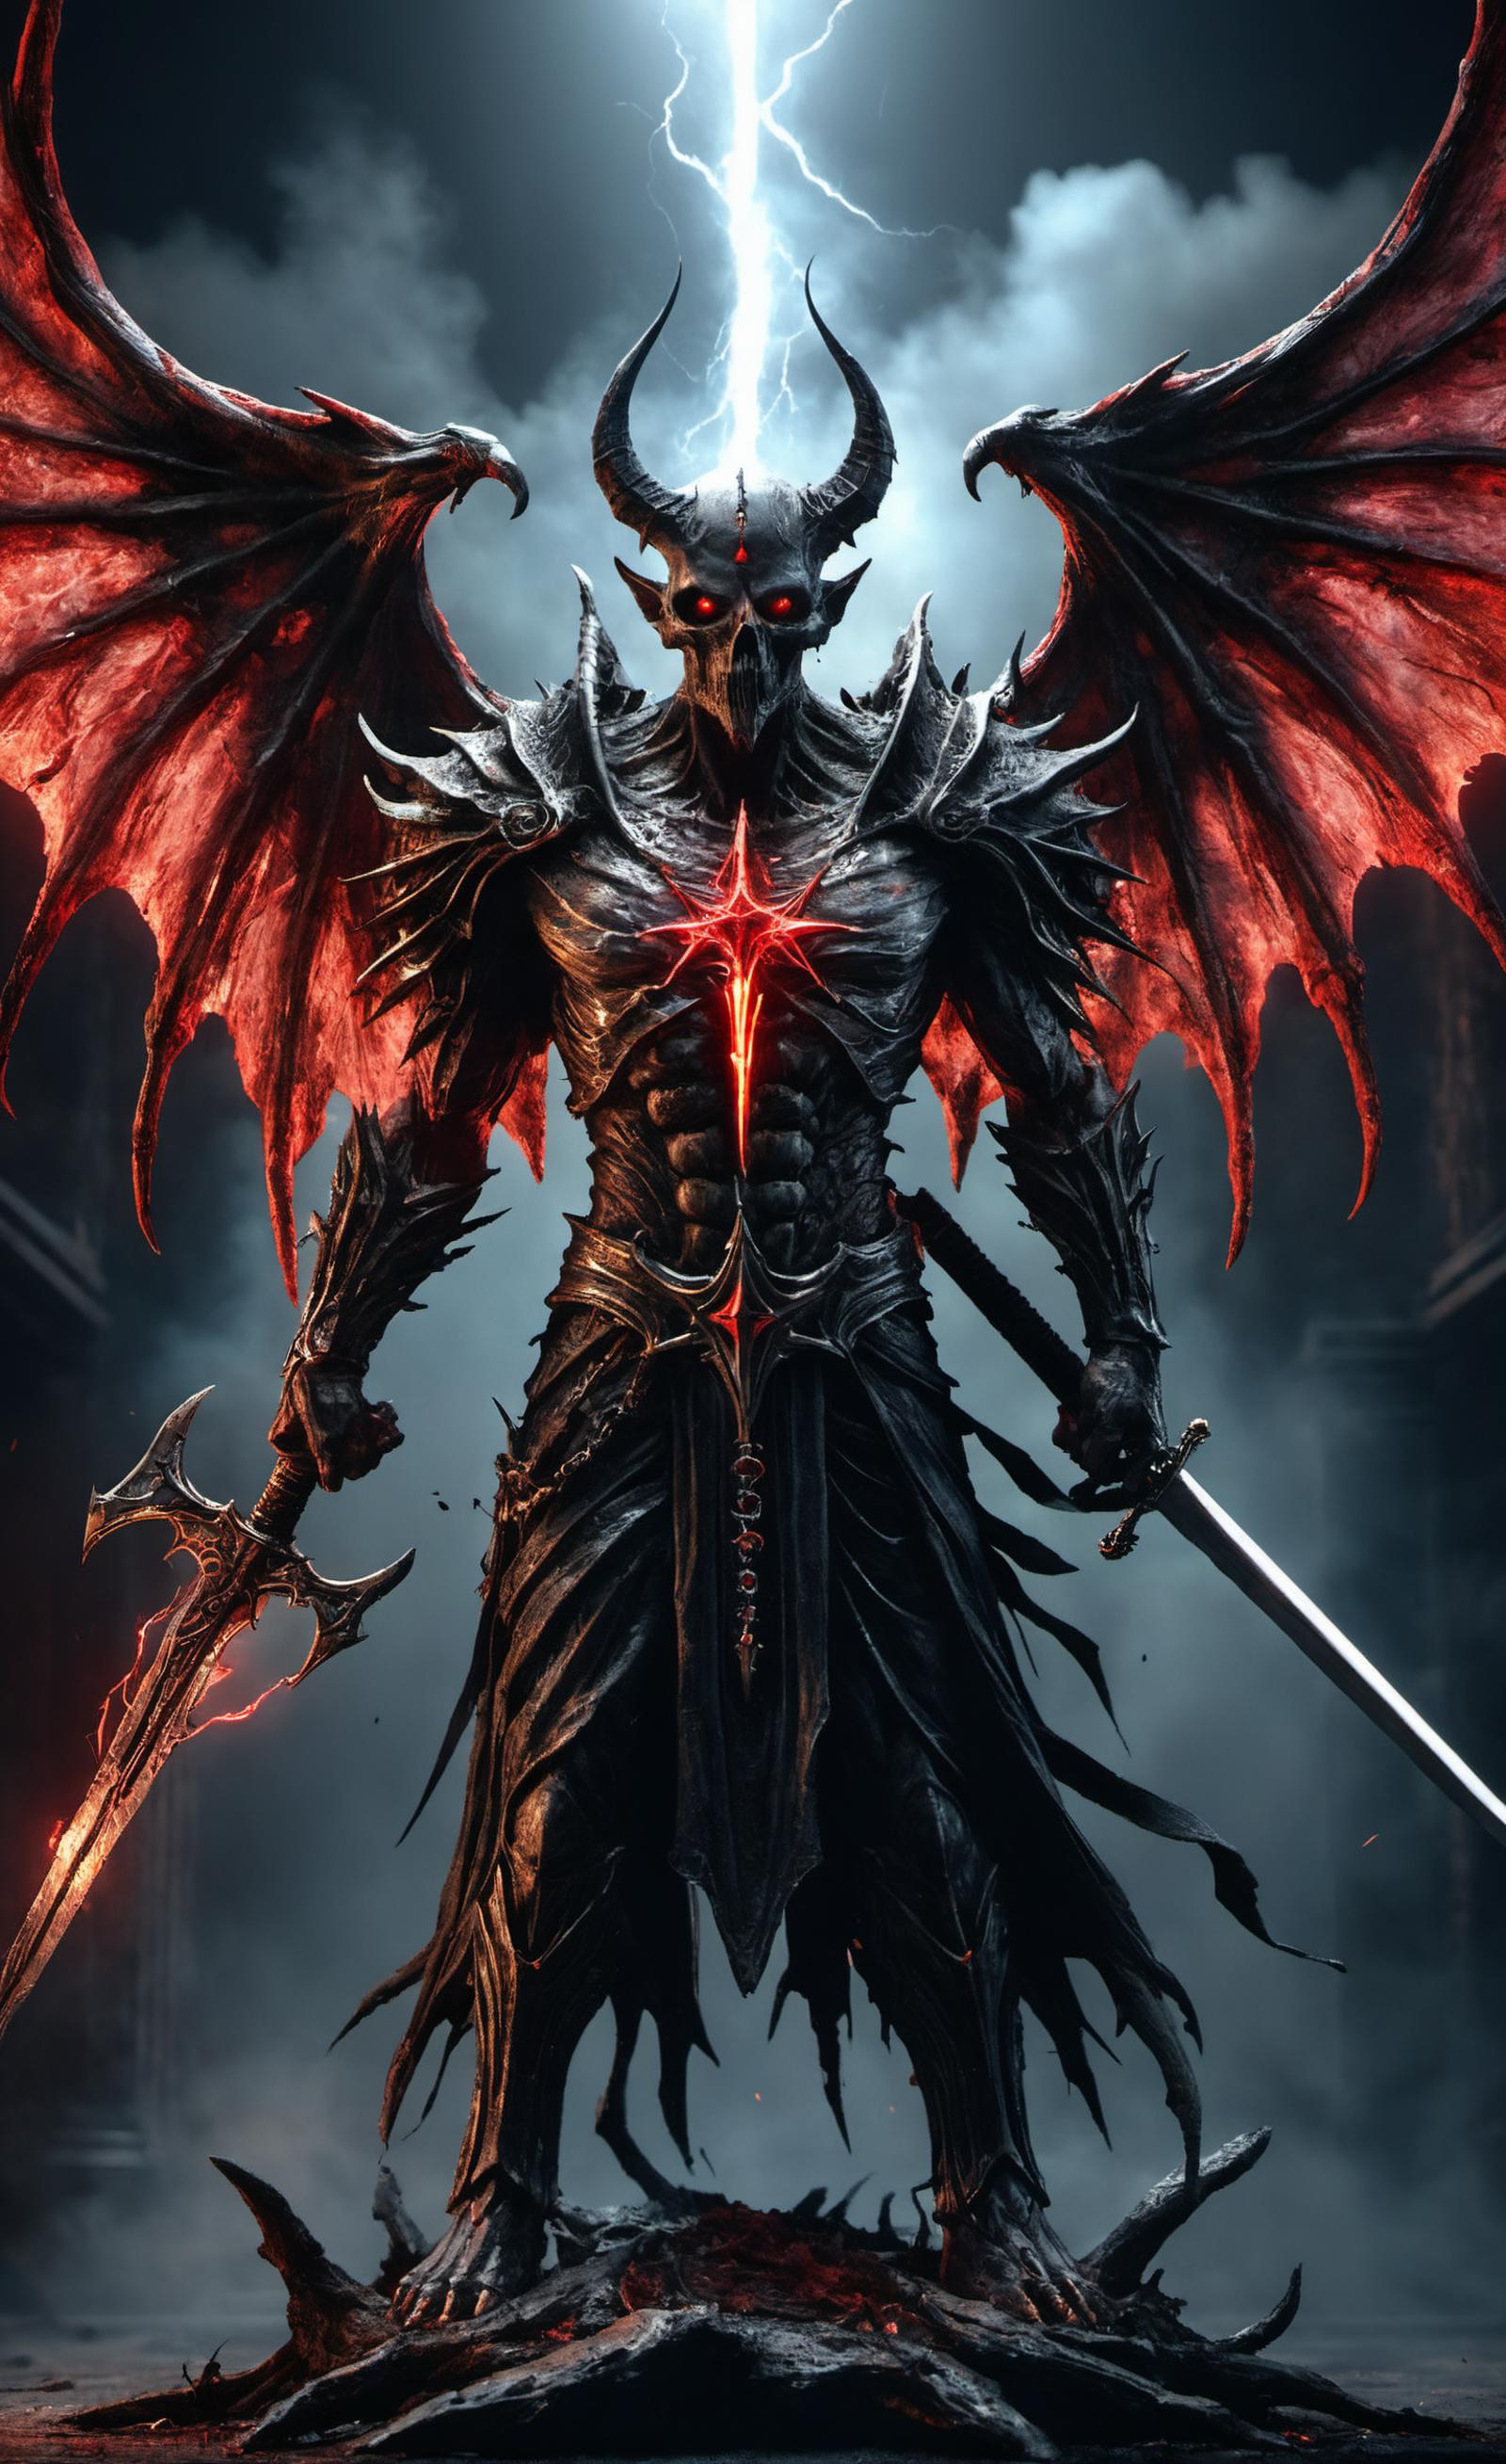 Dark and evil warrior holding a sword and wearing a suit of armor with wings and a skull helmet.